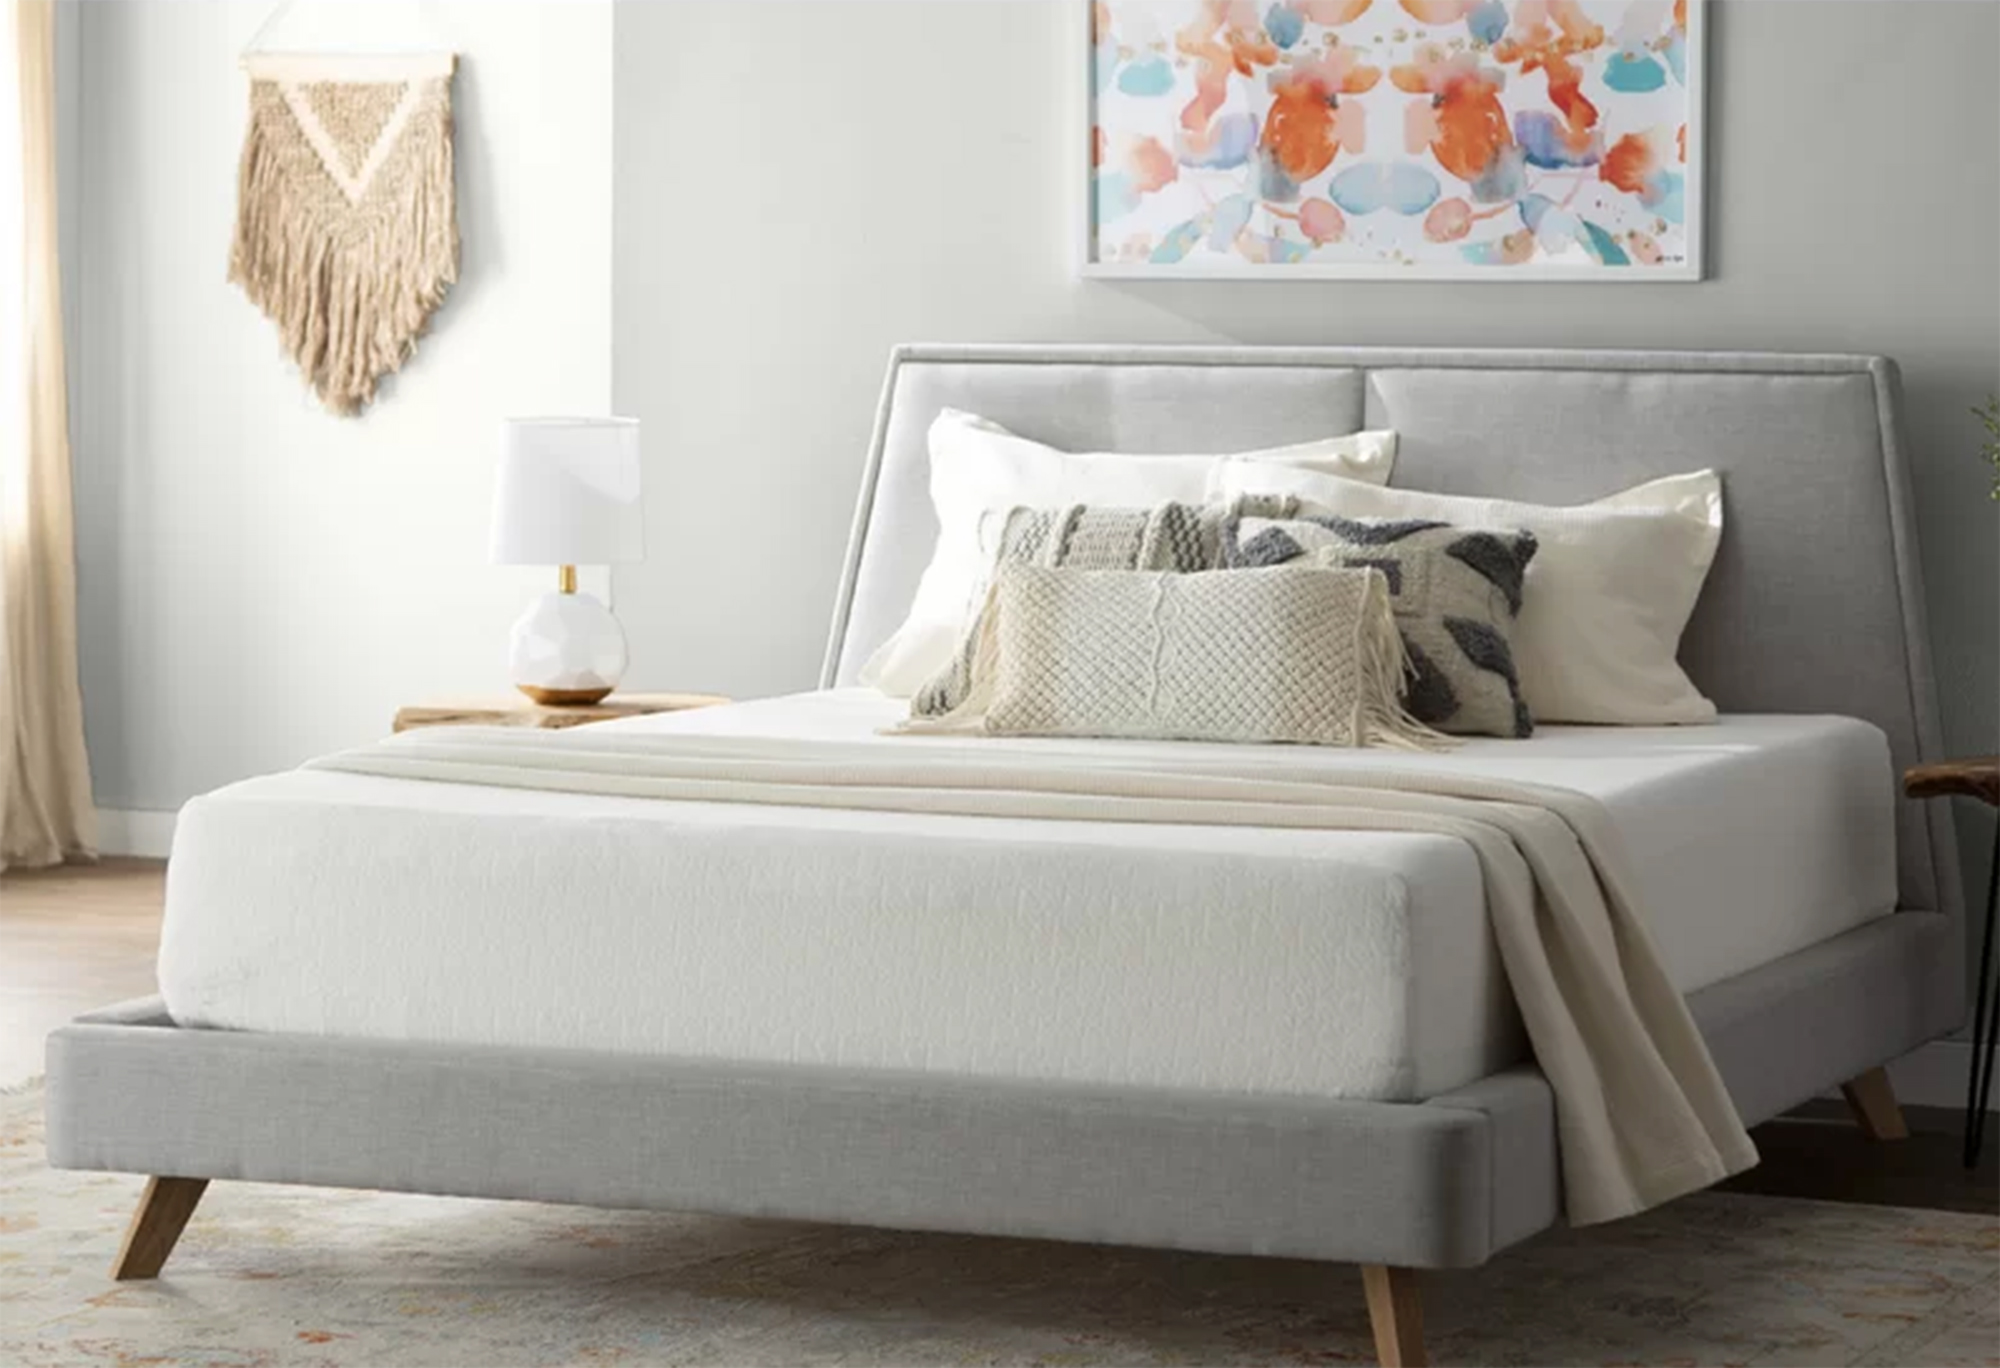 Wayfair Labor Day Deals That Will Make You Excited to Stay at Home